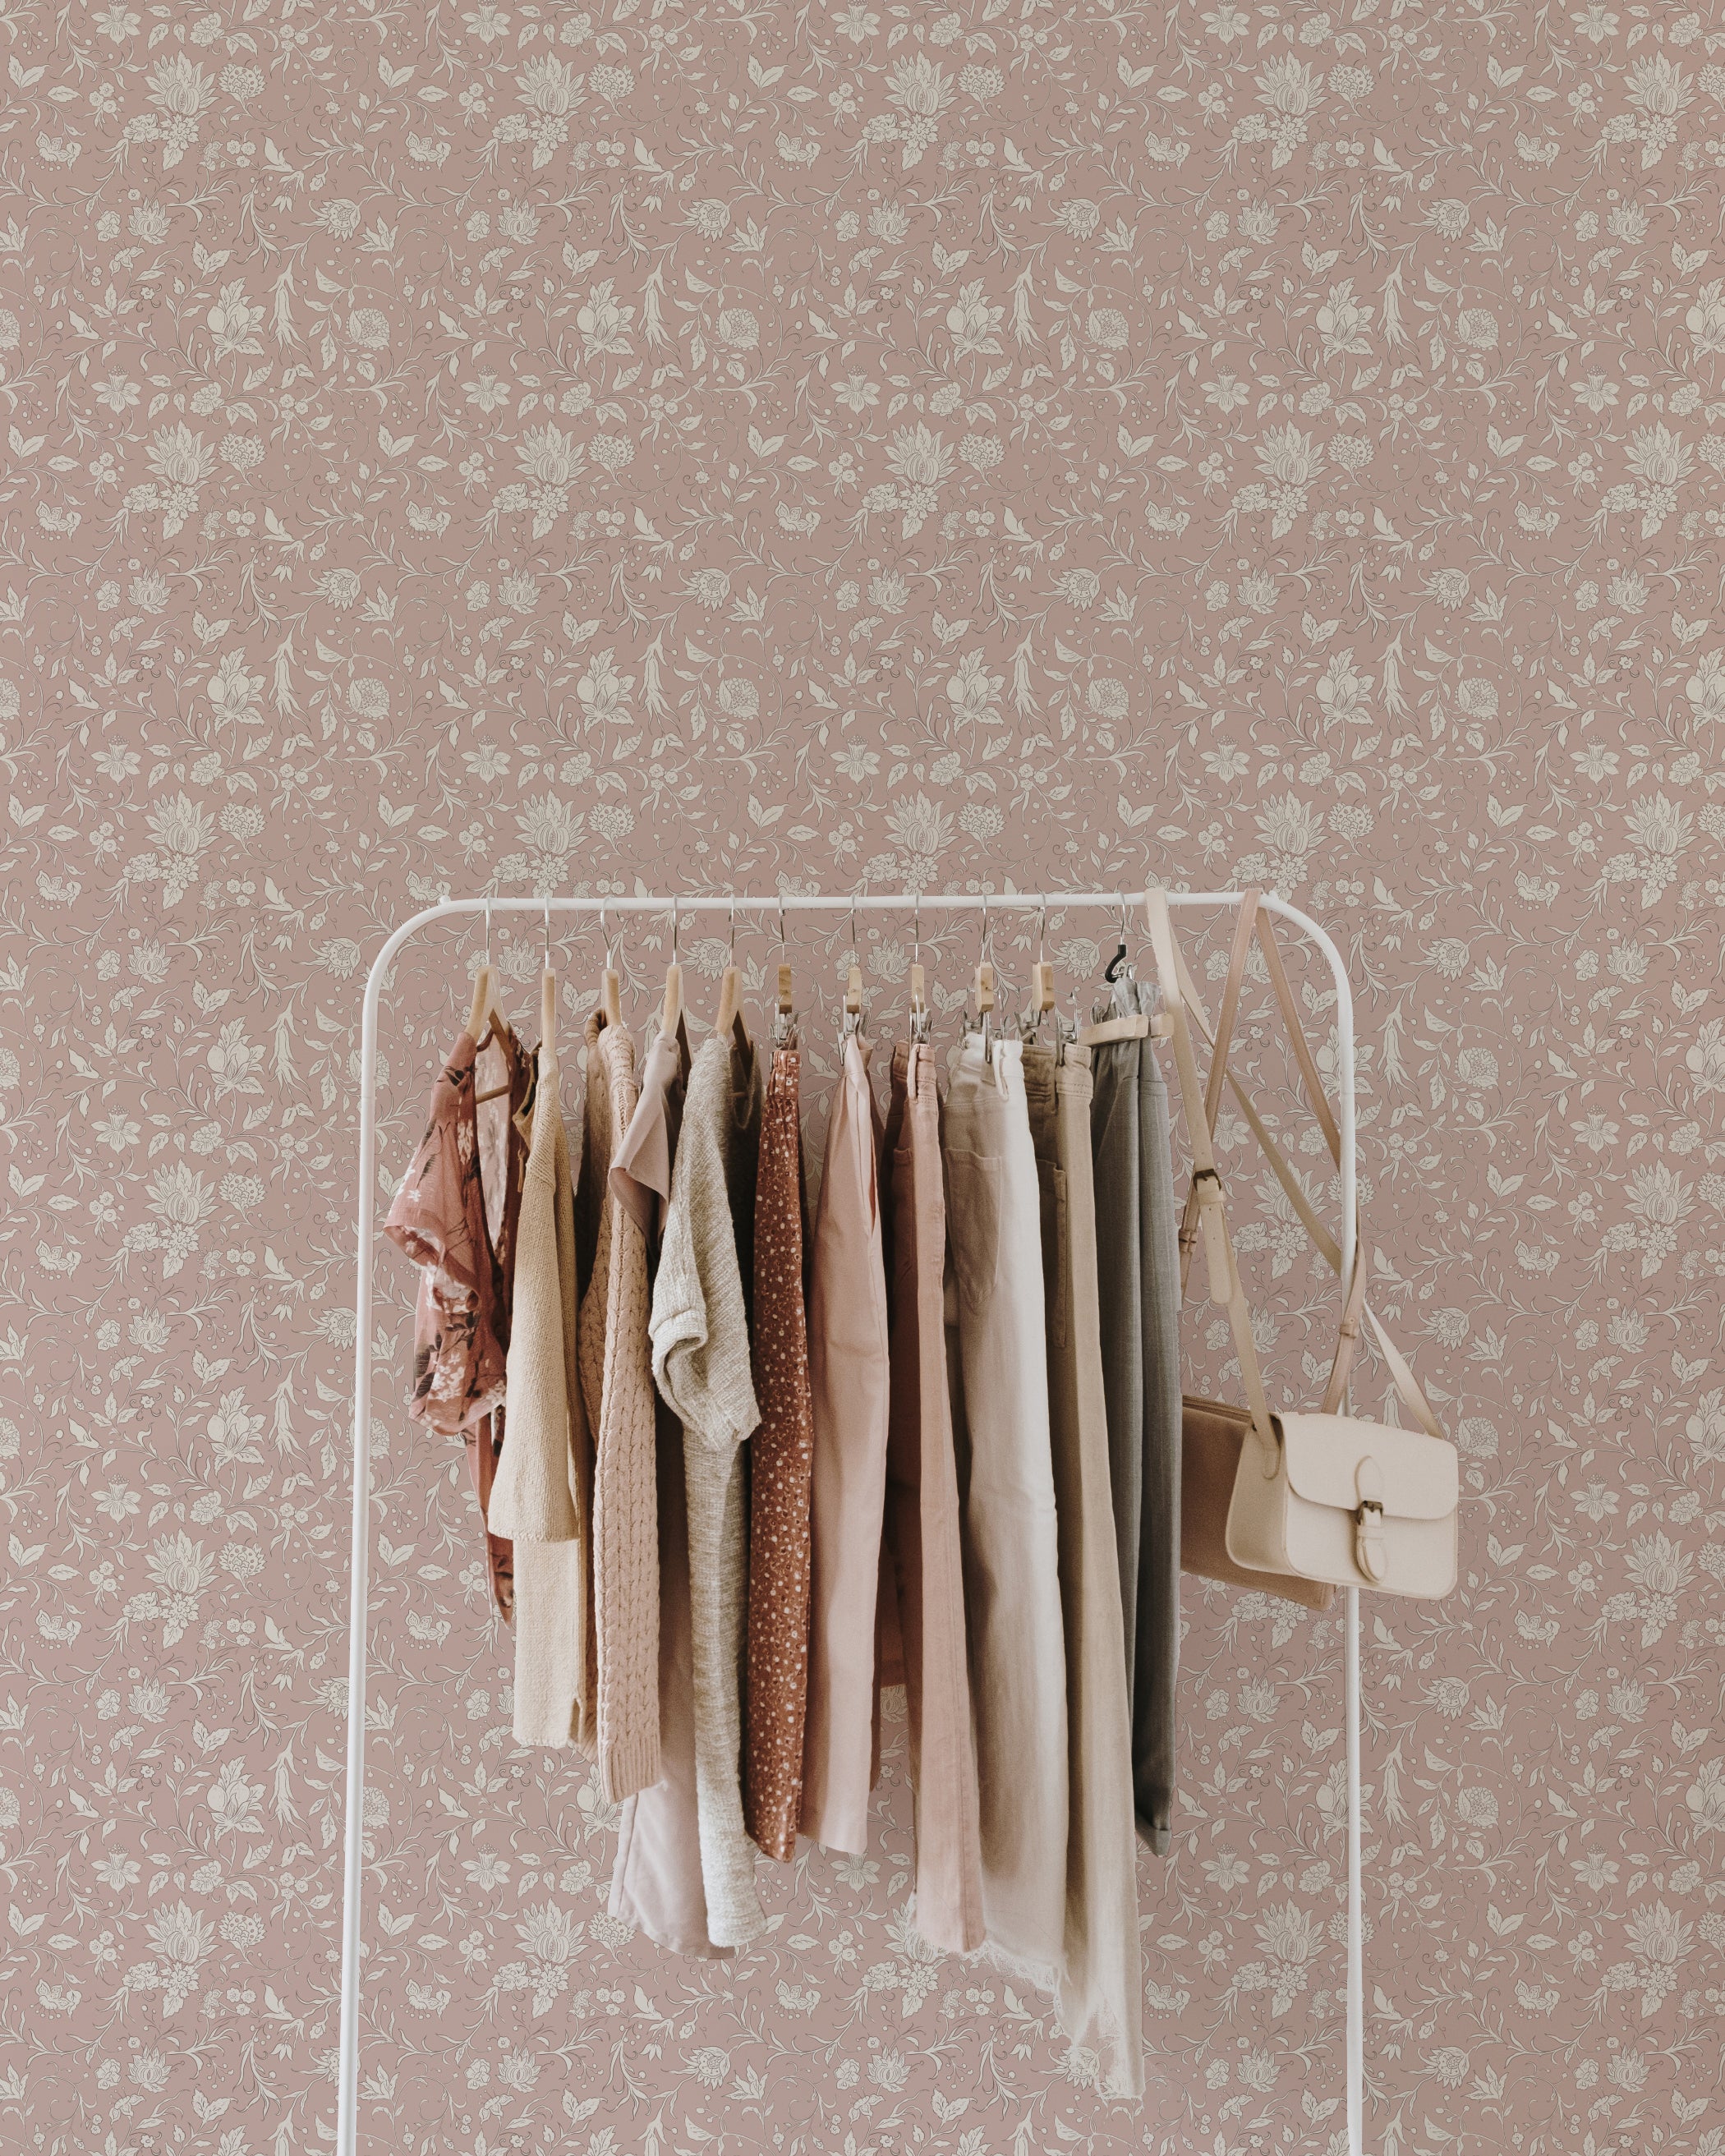 A white clothing rack filled with pastel-colored garments stands against a wall adorned with Noble Florals Wallpaper. The wallpaper features a delicate floral pattern in muted shades of mauve and cream, adding a vintage charm to the space.